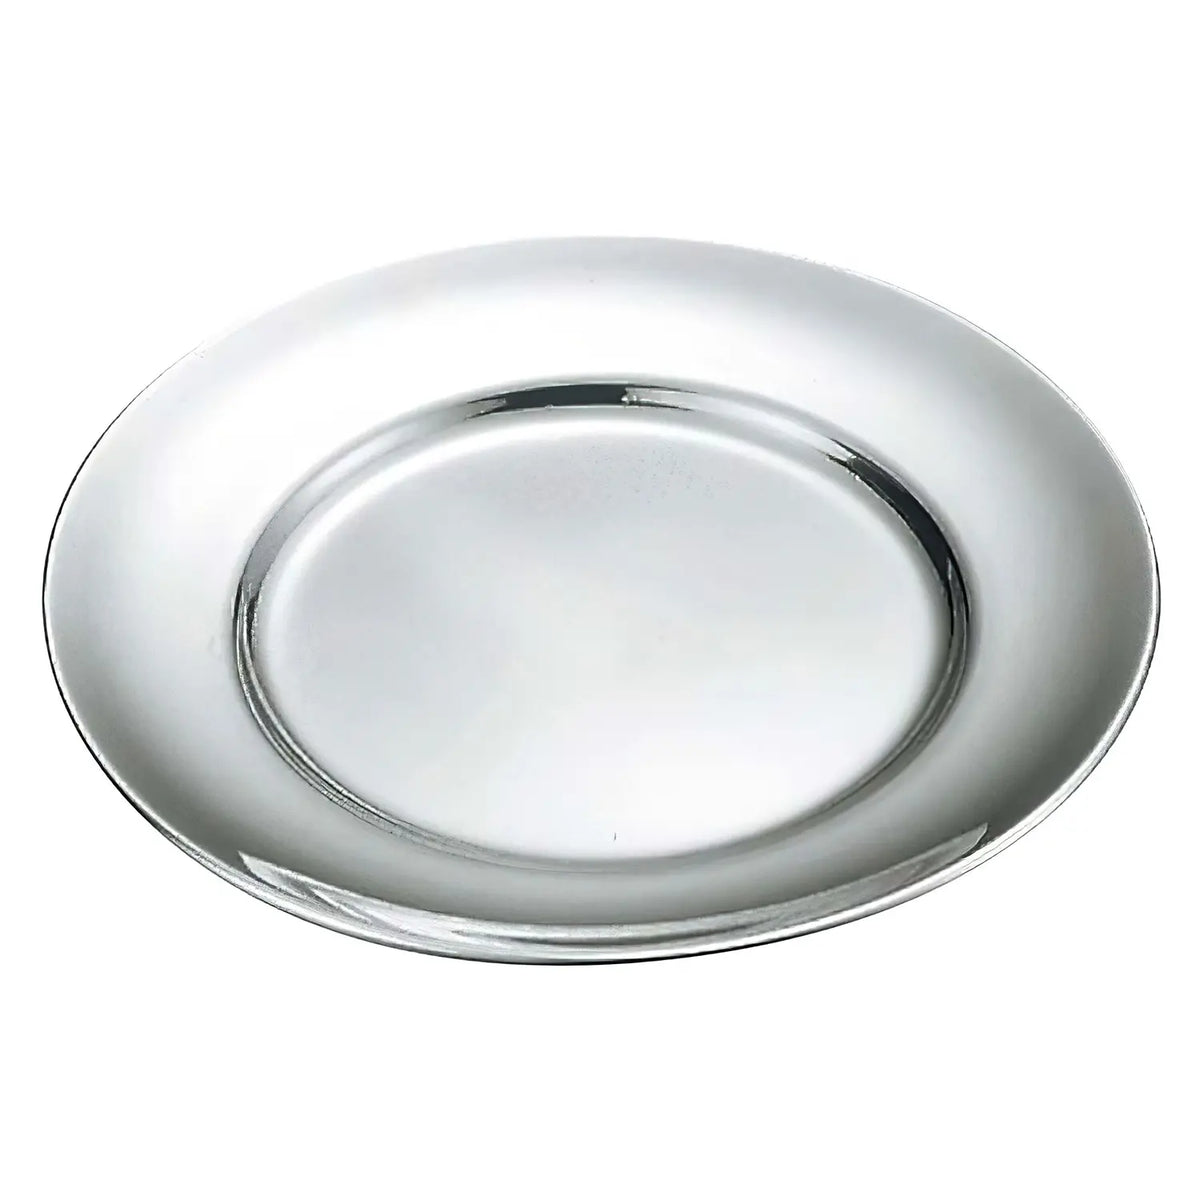 IKD Stainless Steel Serving Dish